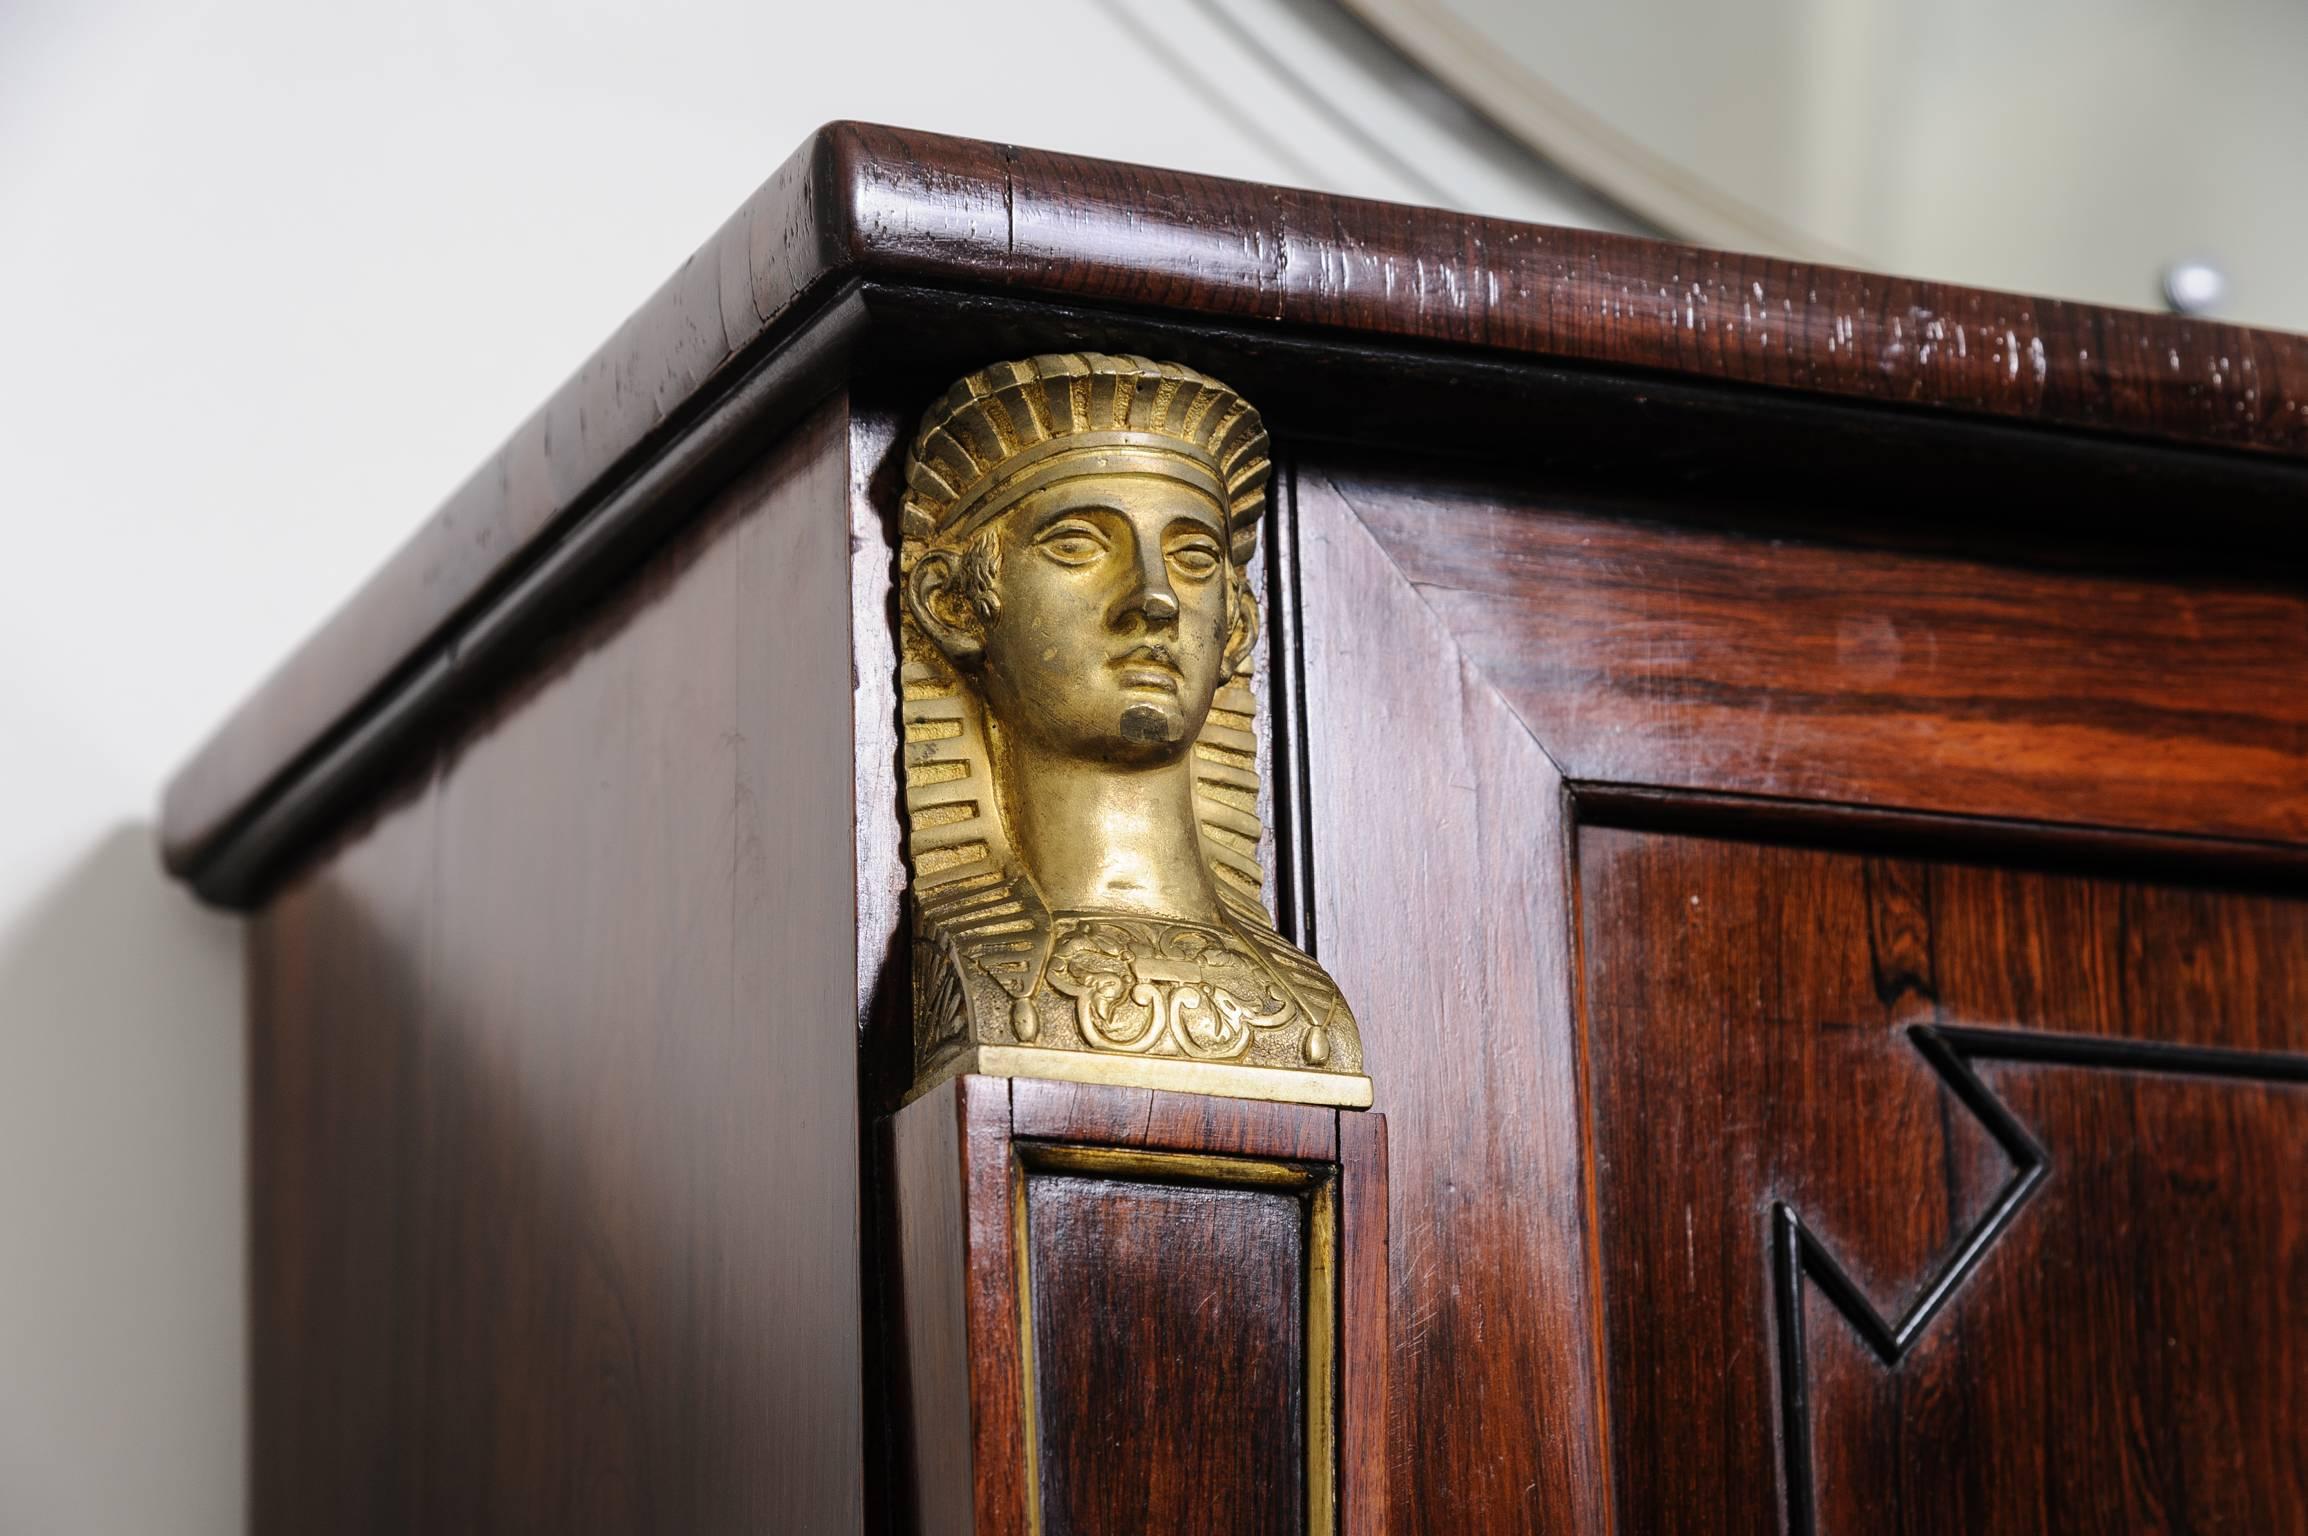 This handsome two-door r cabinet is in the English Regency style and dates from the early 19th century. The piece is detailed with Egyptian caryatid pilasters and the interior has four adjustable shelves. 

The cabinet maker was definitely inspired